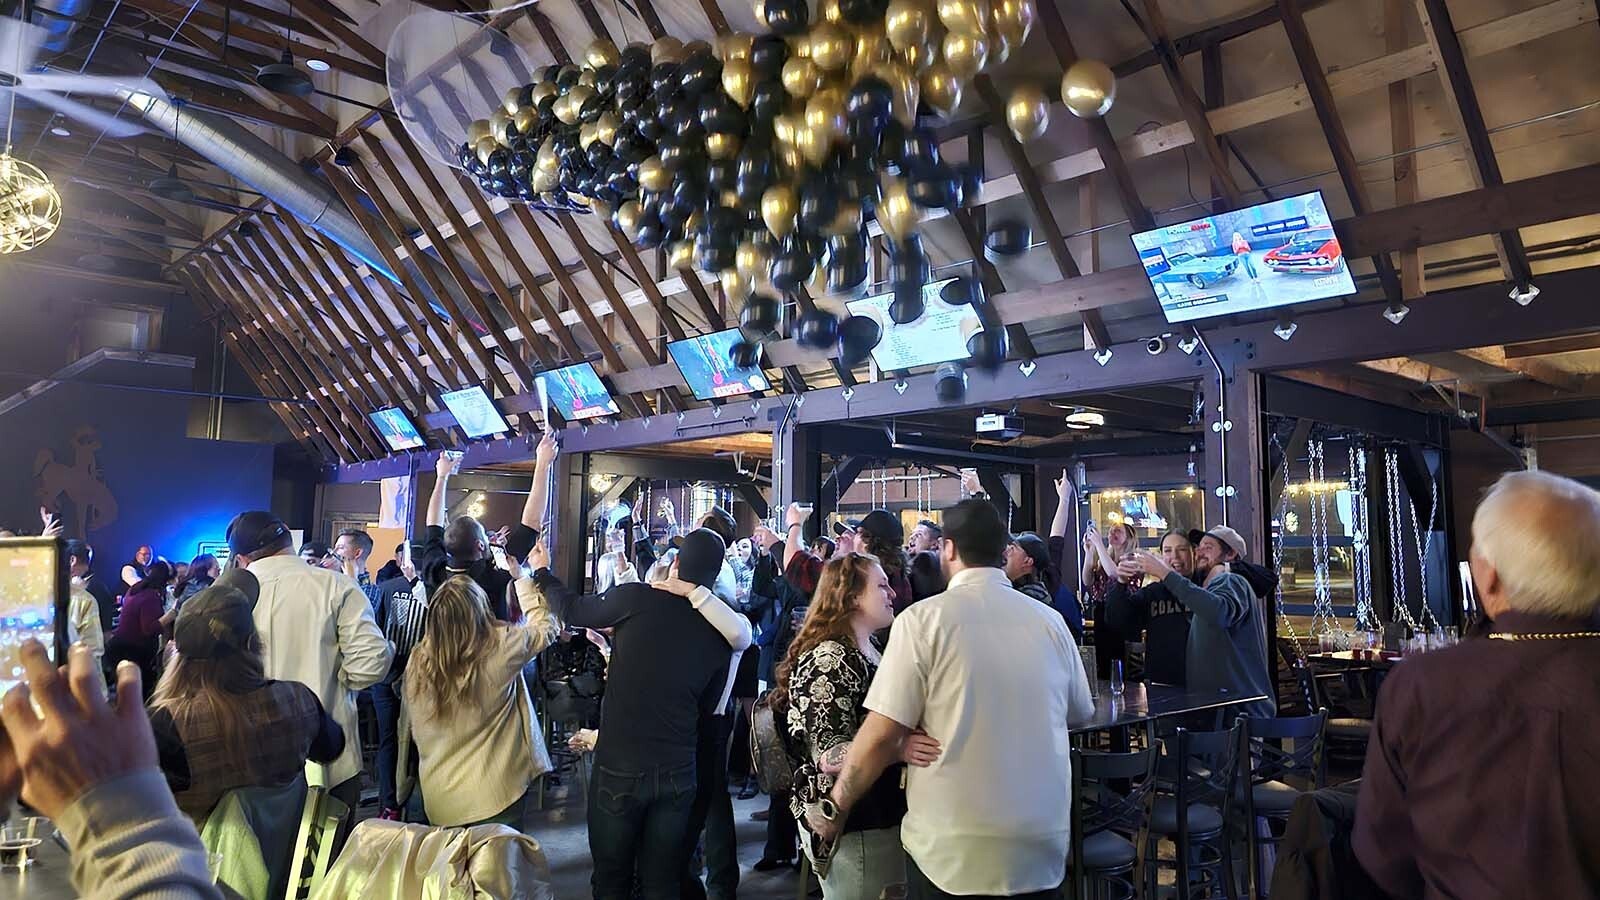 Balloons drop during the first New Year's Eve celebration at Westby Edge Brewing Company, Cheyenne's newest brewery.